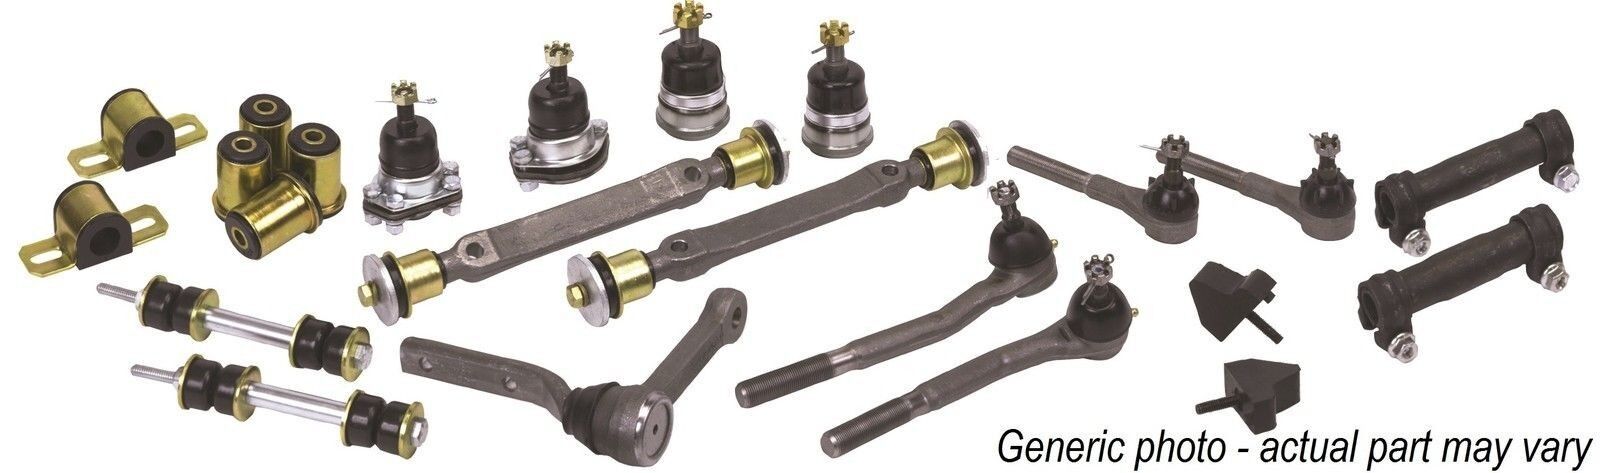 PST Polygraphite Super Front End Kit 1973-74 Buick/Chevy/Oldsmobile X Body